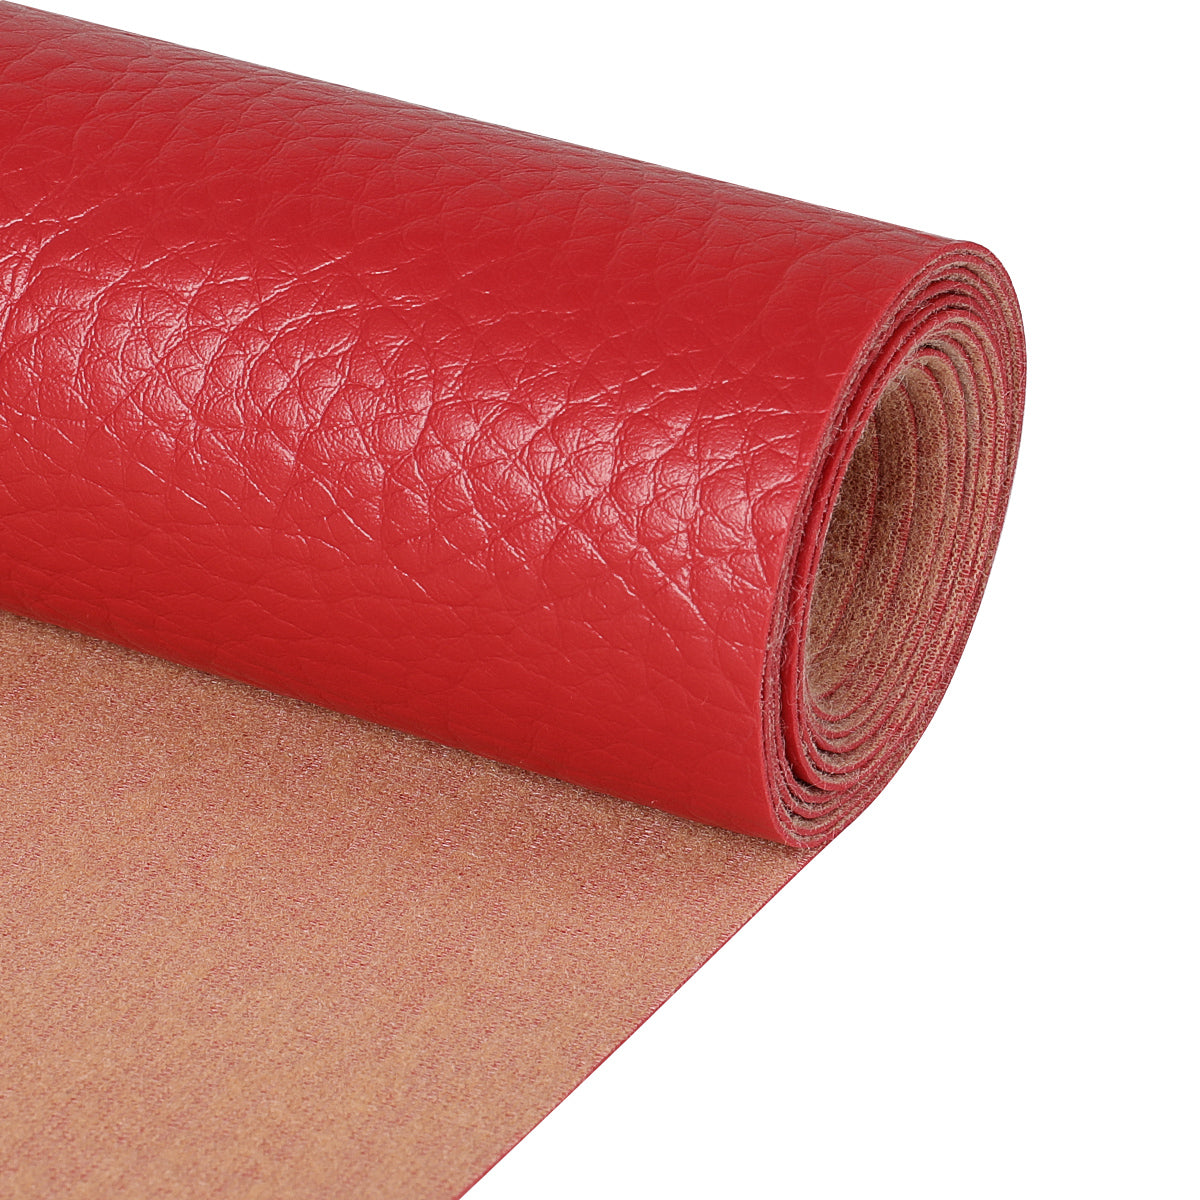 G626 Red Distressed Leather Look Upholstery Grade Recycled Leather (Bonded  Leather) by The Yard